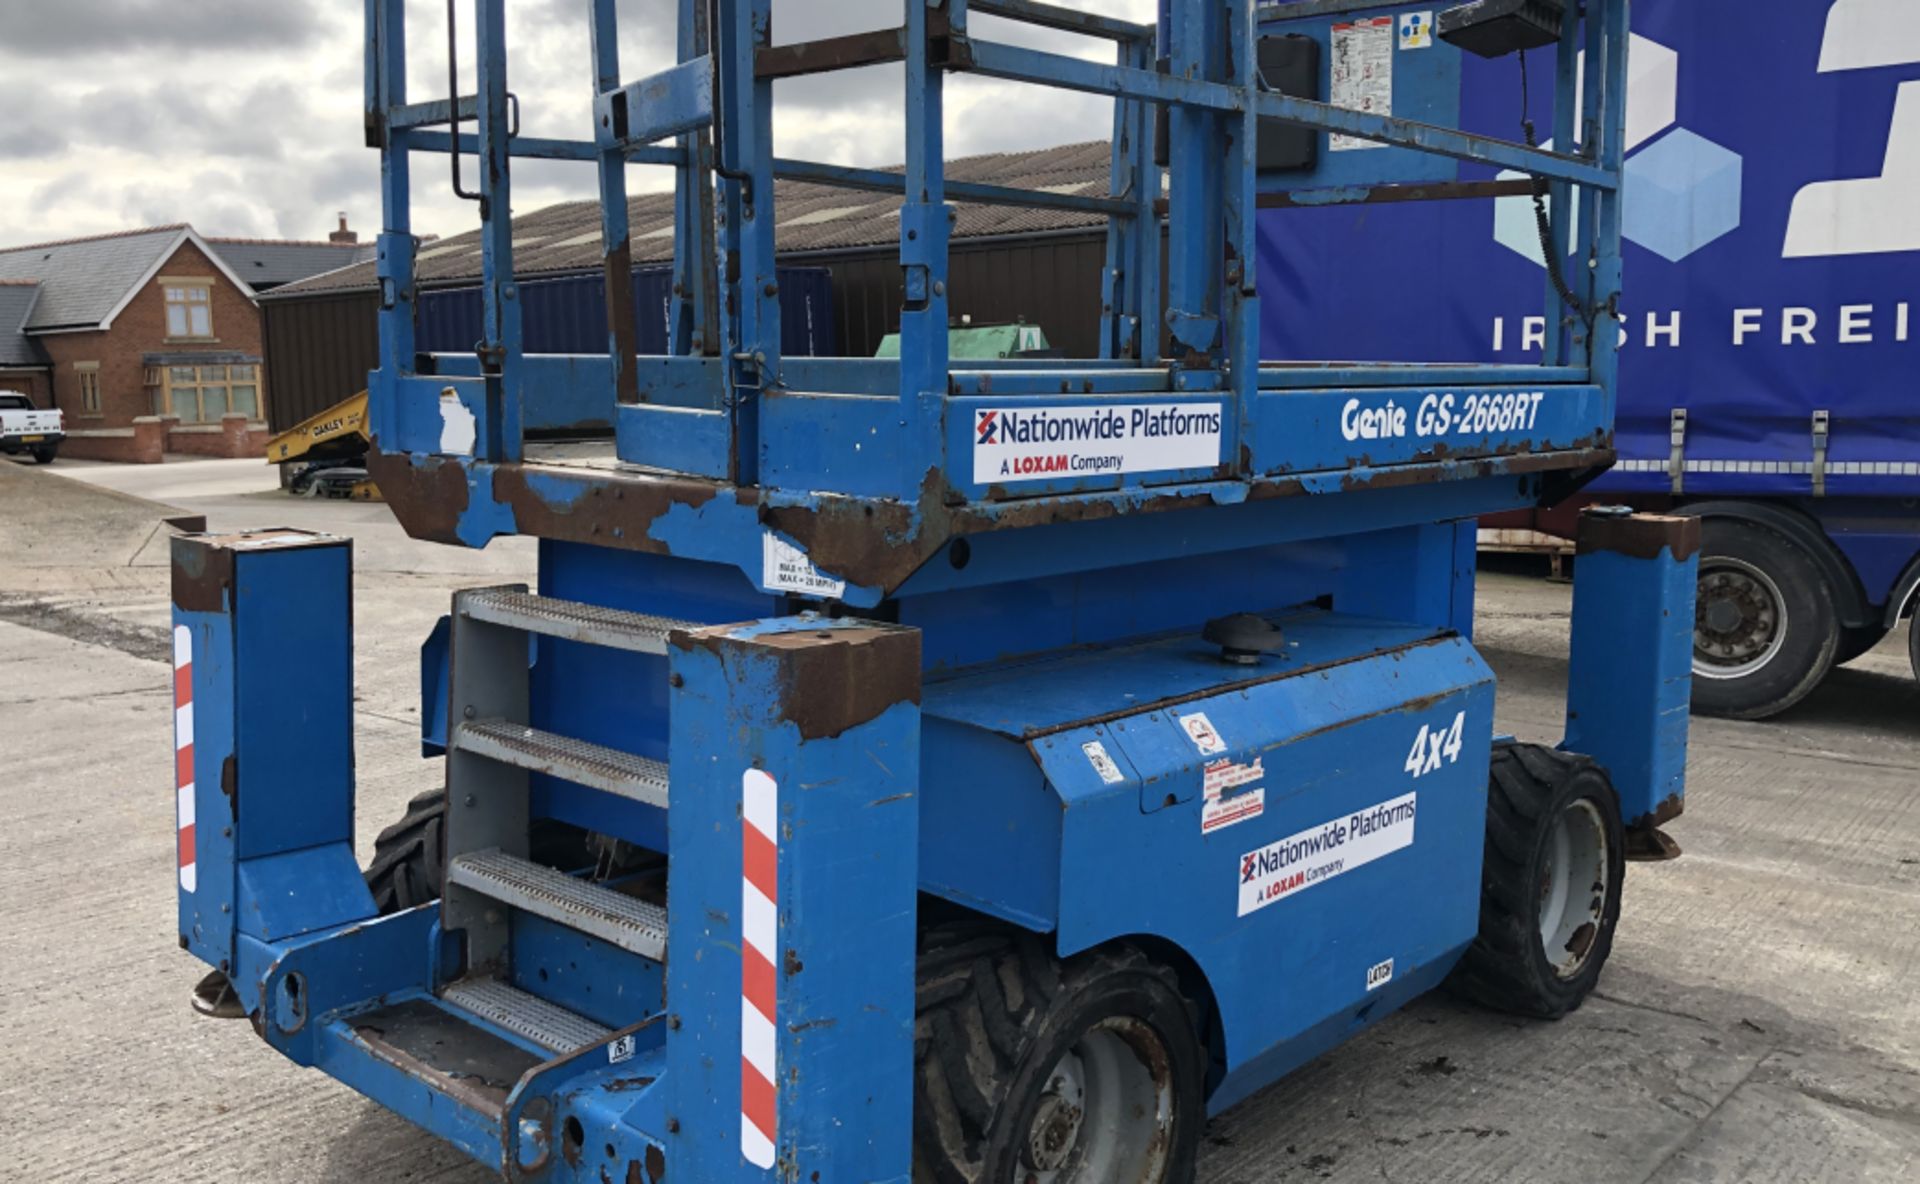 4×4 SIZZLER LIFT | 10M LIFT 2008 GENIE GS 2668 RT - Image 14 of 15